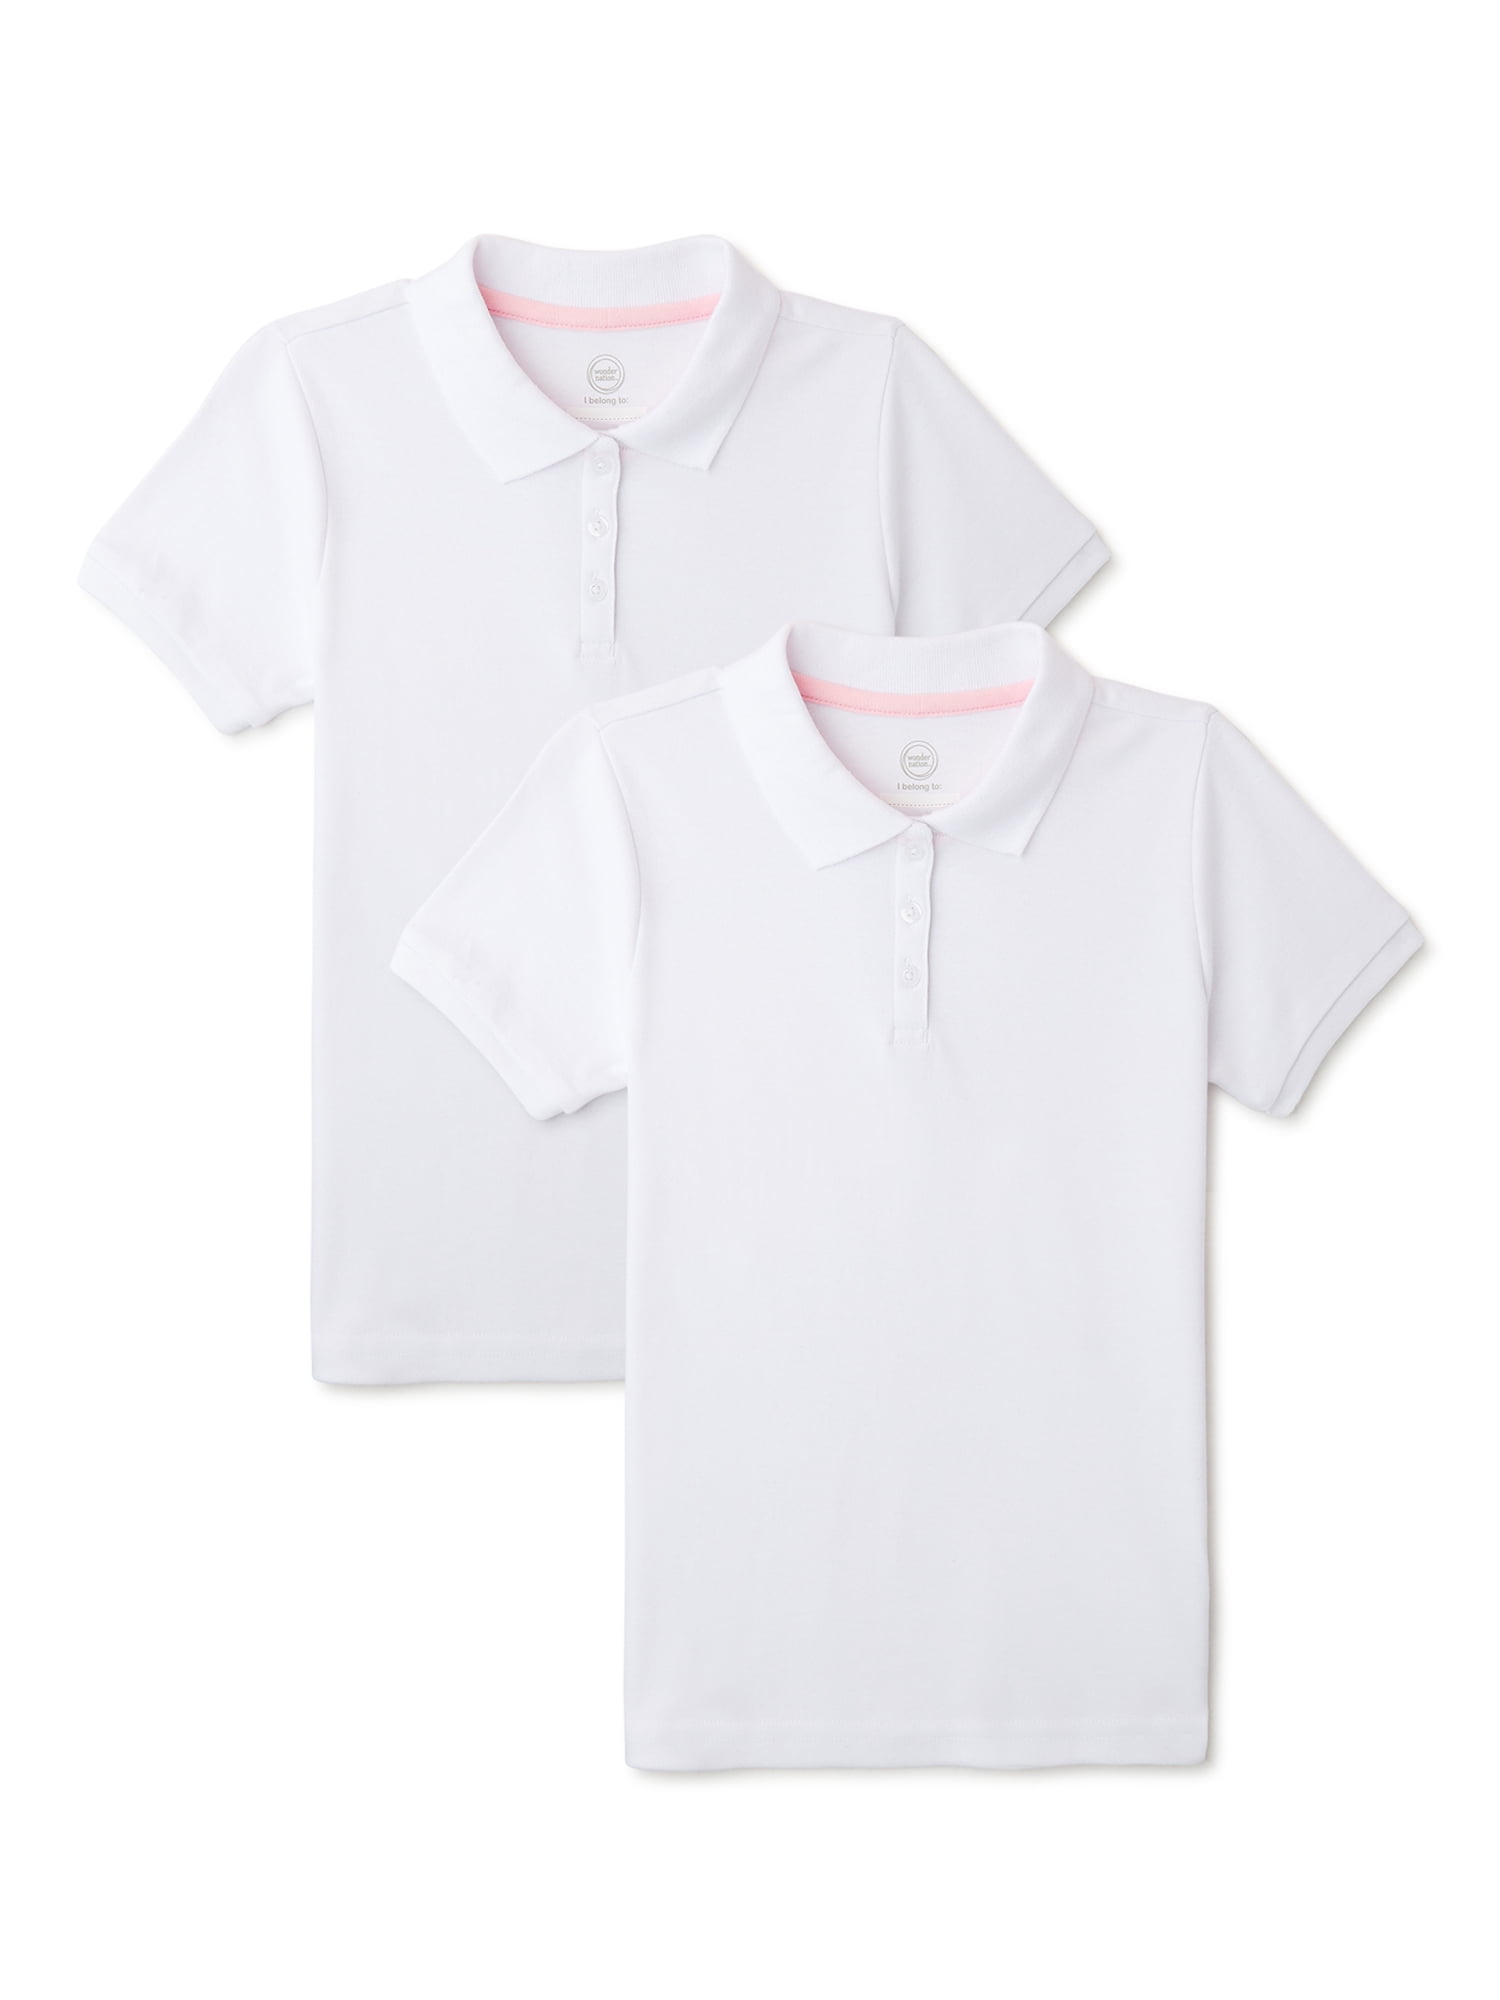 14/16 Basic White More Styles Available Limited Too Girls Polo Shirt 